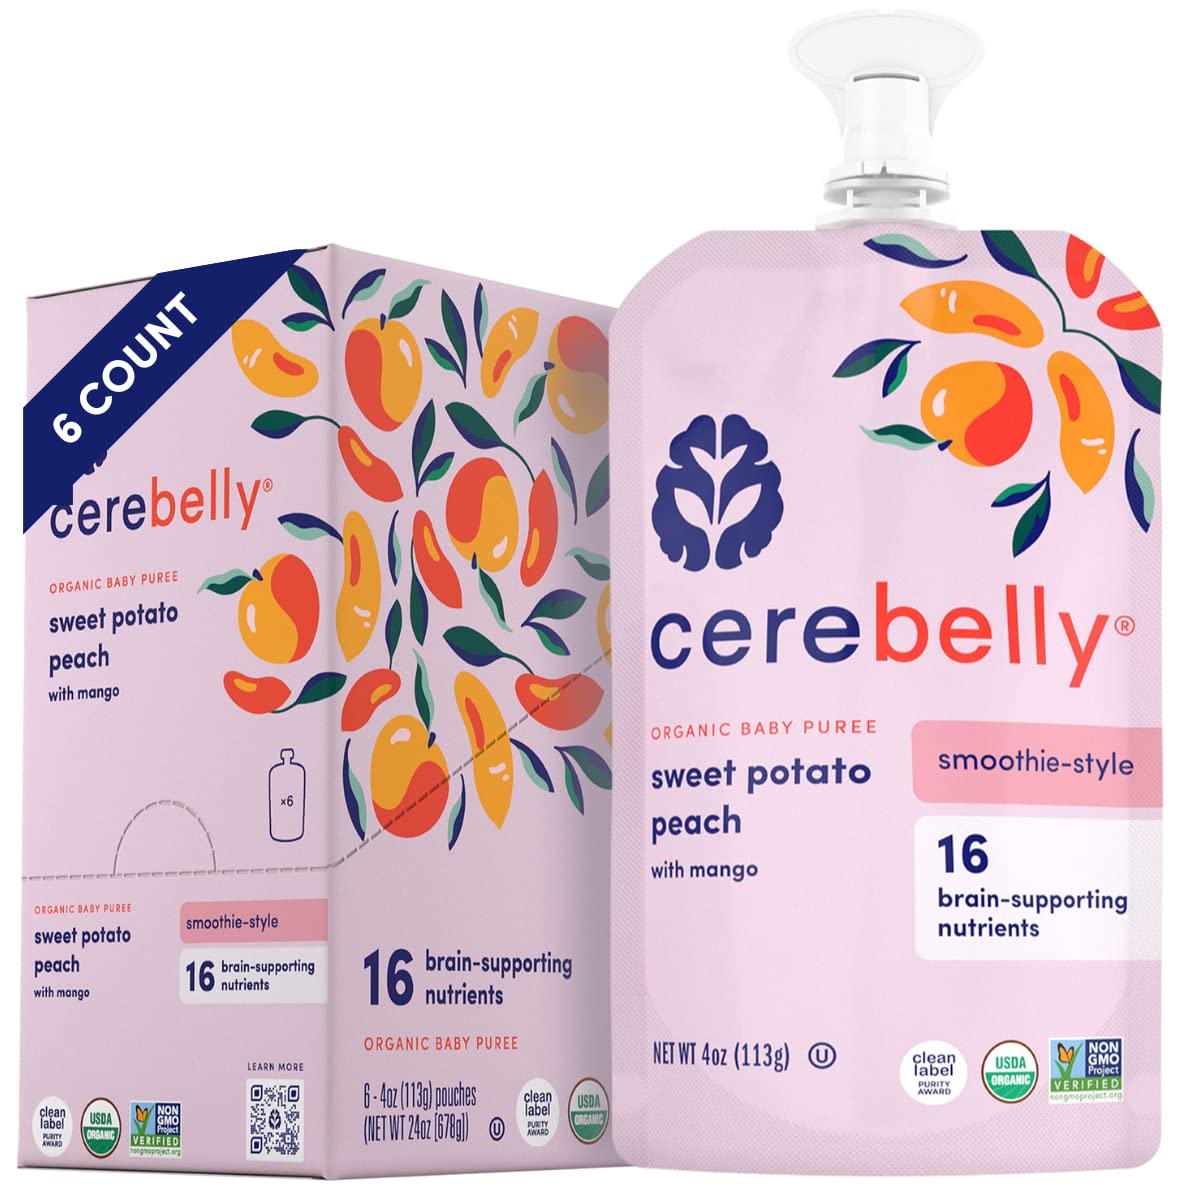 Cerebelly Sweet Potato Peach Smoothie (Pack of 6) - Healthy Kids Snacks - Baby Food Pouch with 16 Vital Nutrients and Brain Support from Superfoods - Organic Fruit & Veggie Purees, Baby Fruit Squeeze Pouches for Kids, No Added Sugar